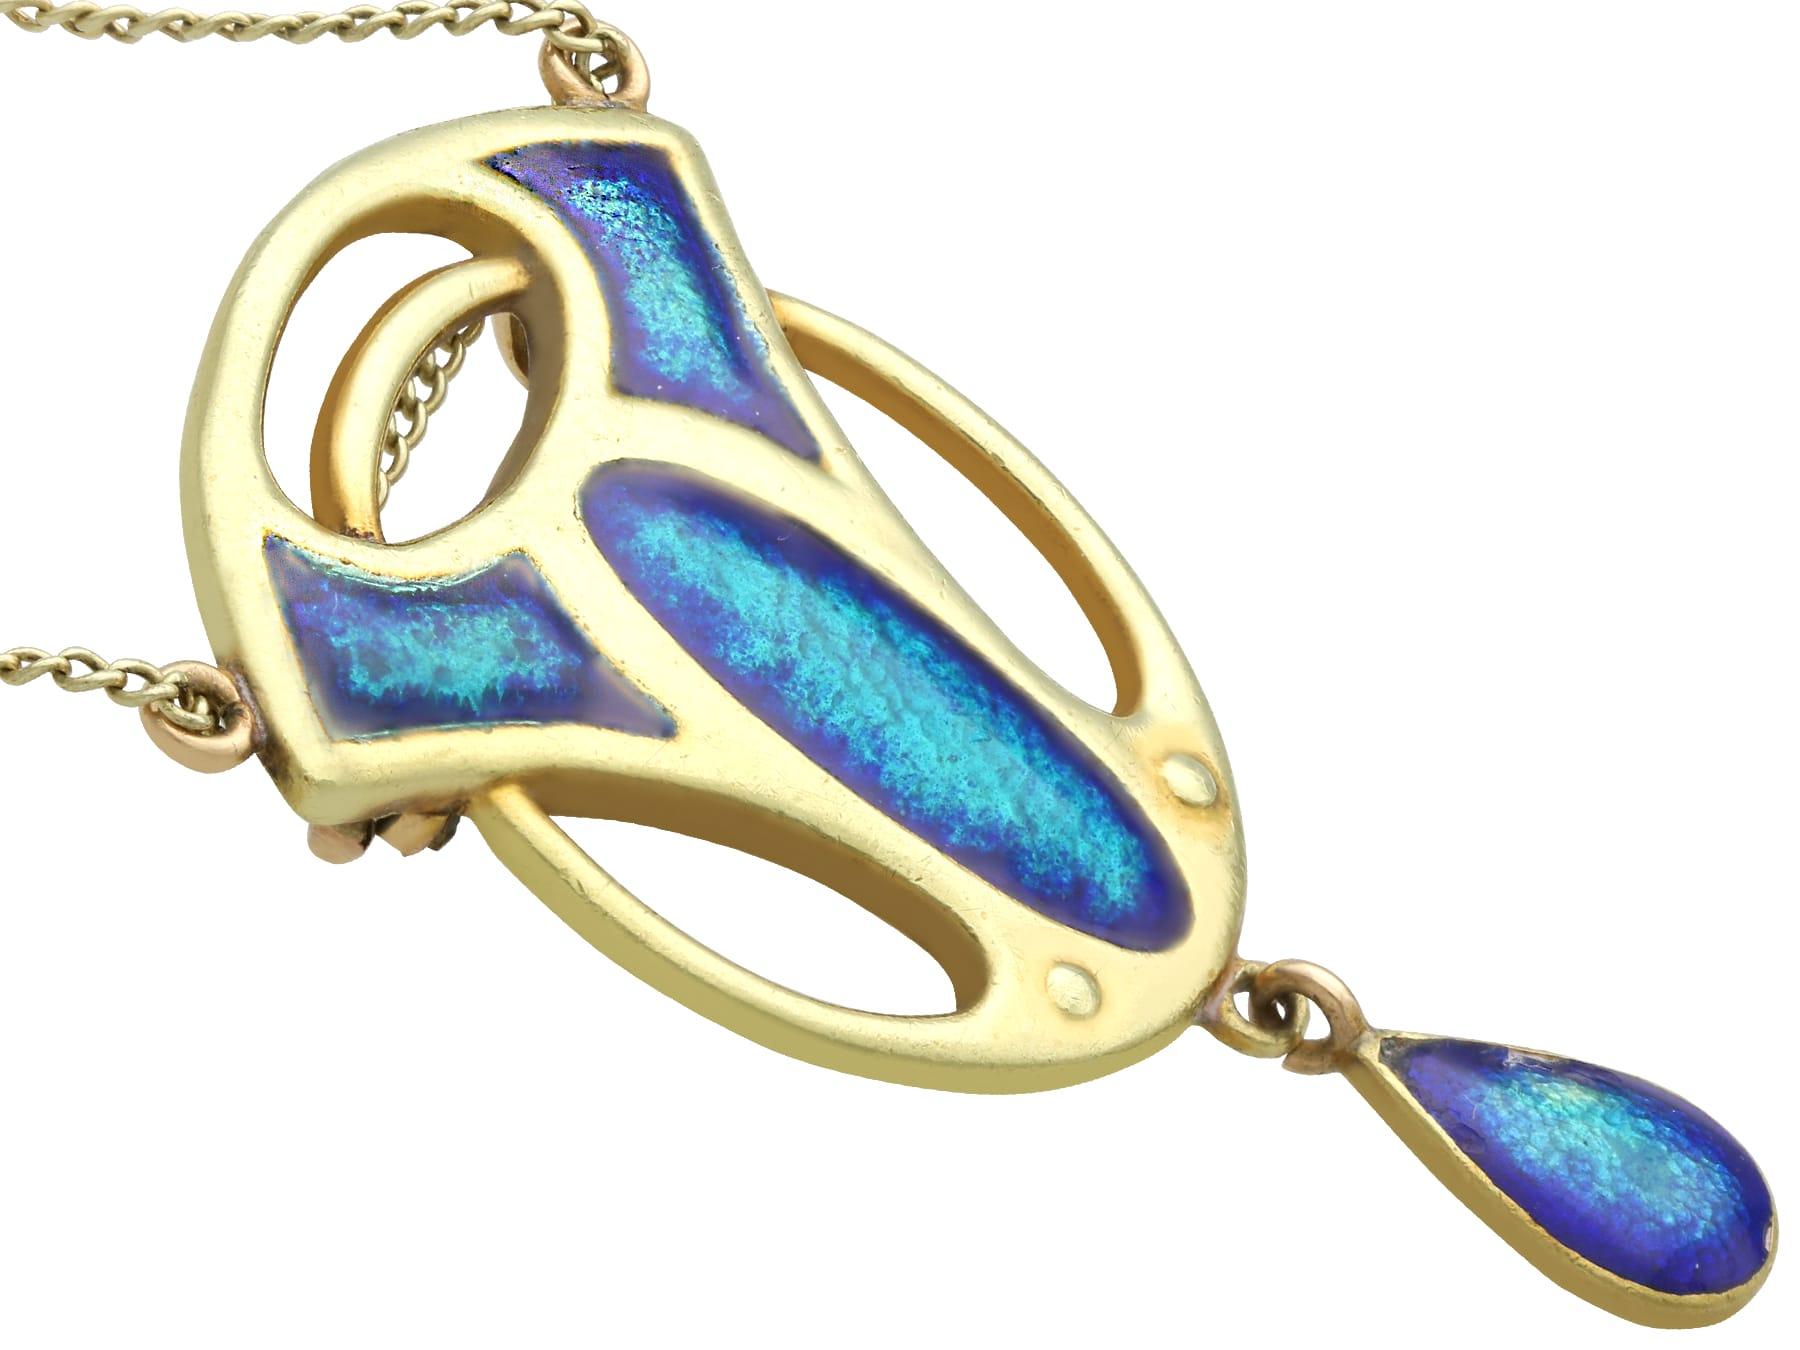 Antique Art Nouveau Enamel and 18k Yellow Gold Pendant  In Excellent Condition For Sale In Jesmond, Newcastle Upon Tyne